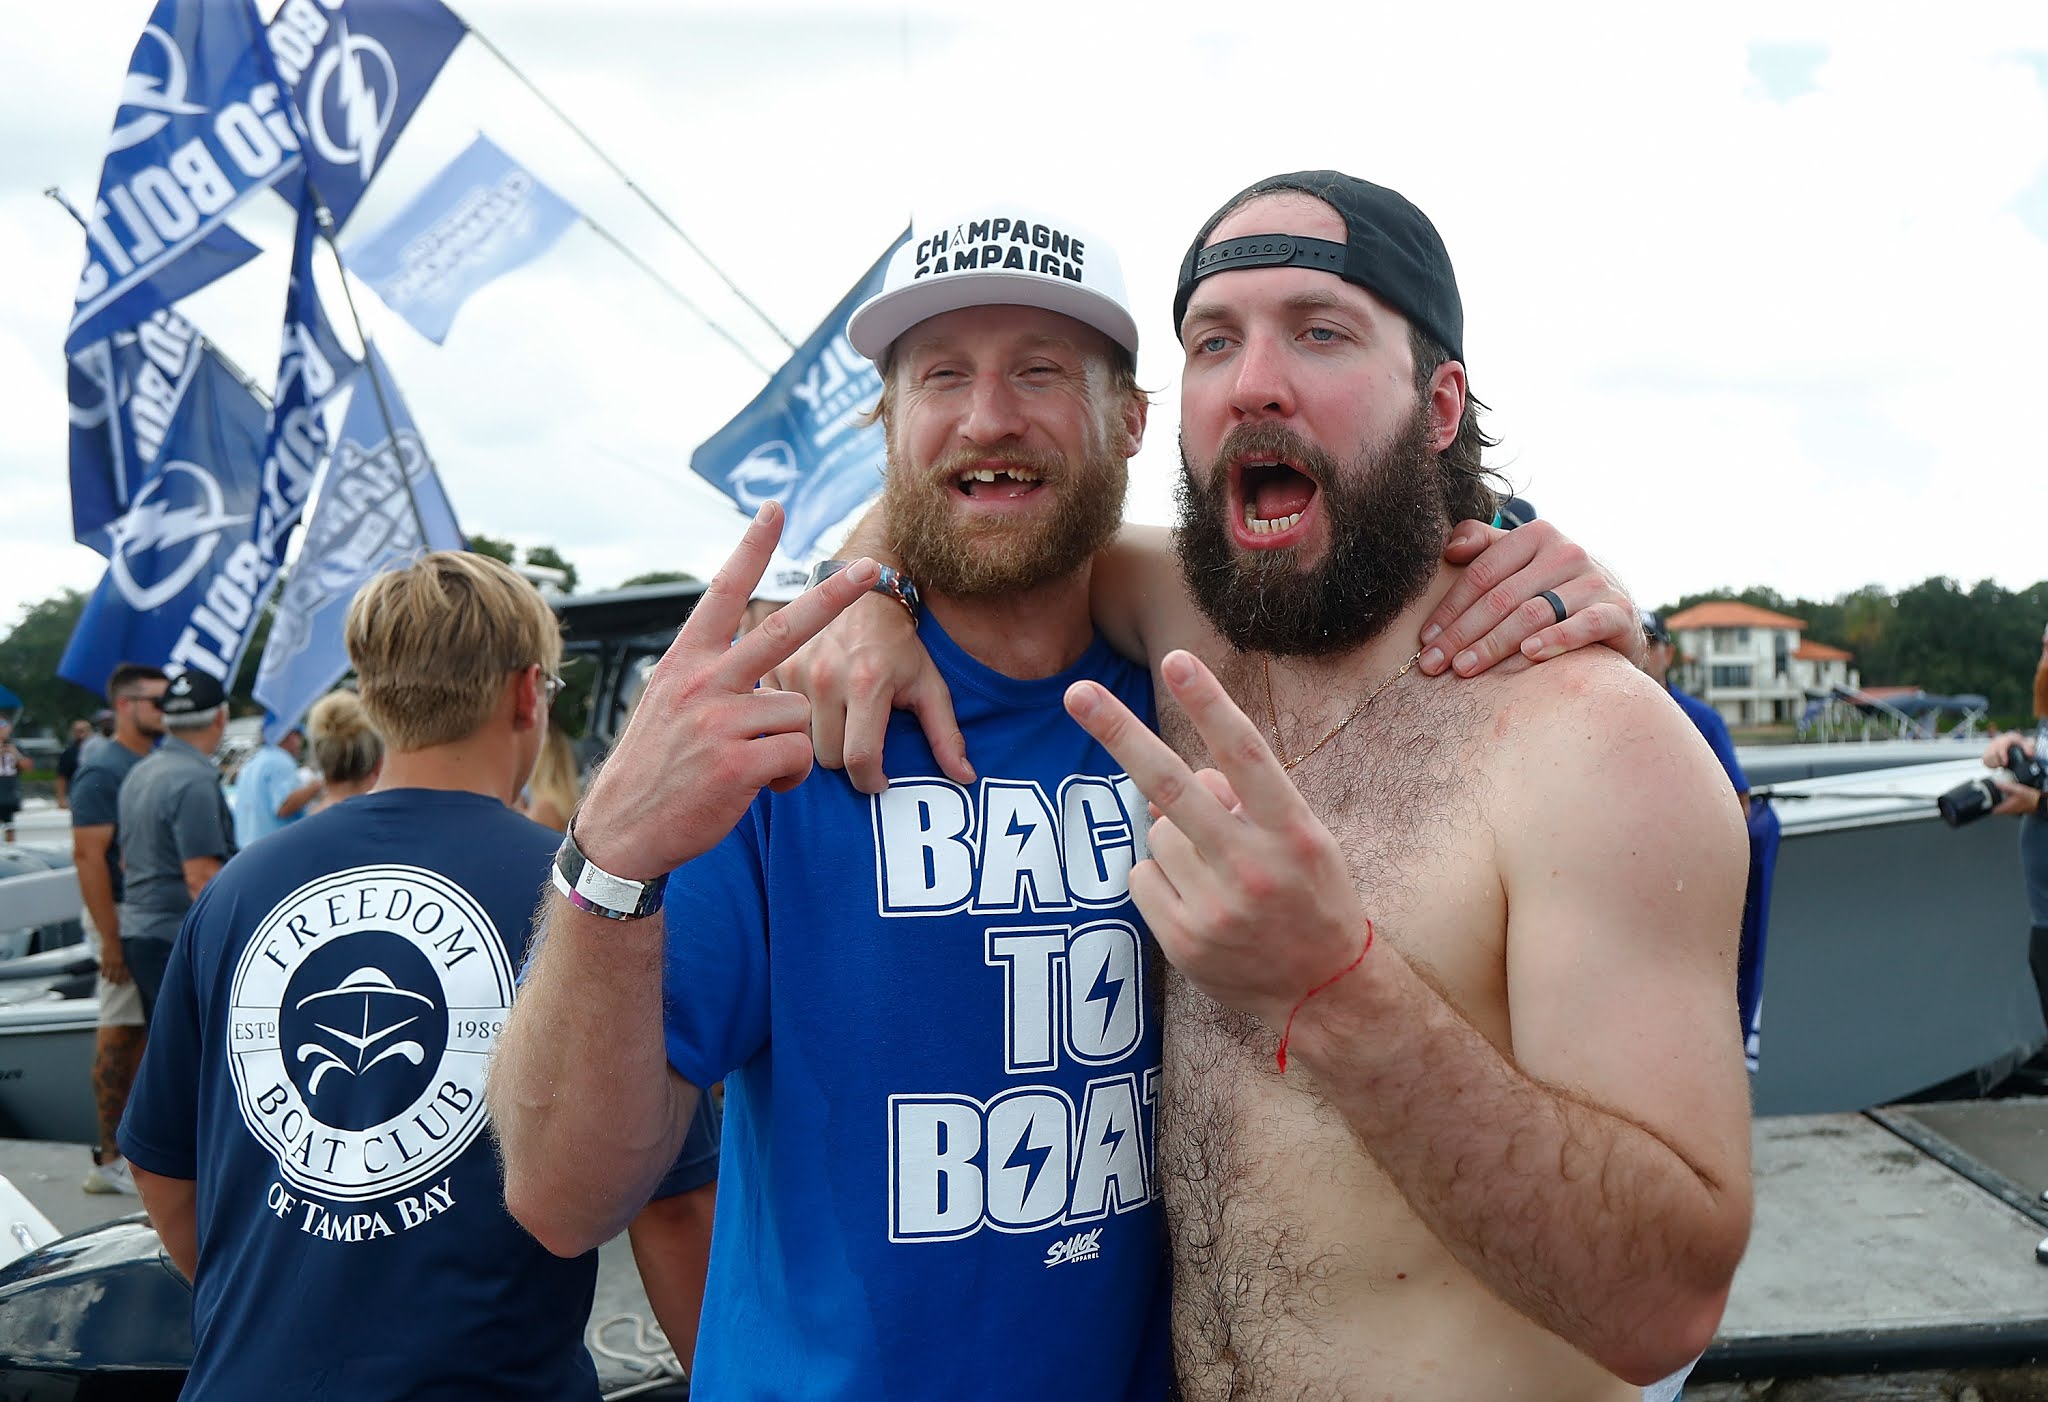 Shirtless Nikita Kucherov rips Canadiens fans after Lightning's Stanley Cup  win